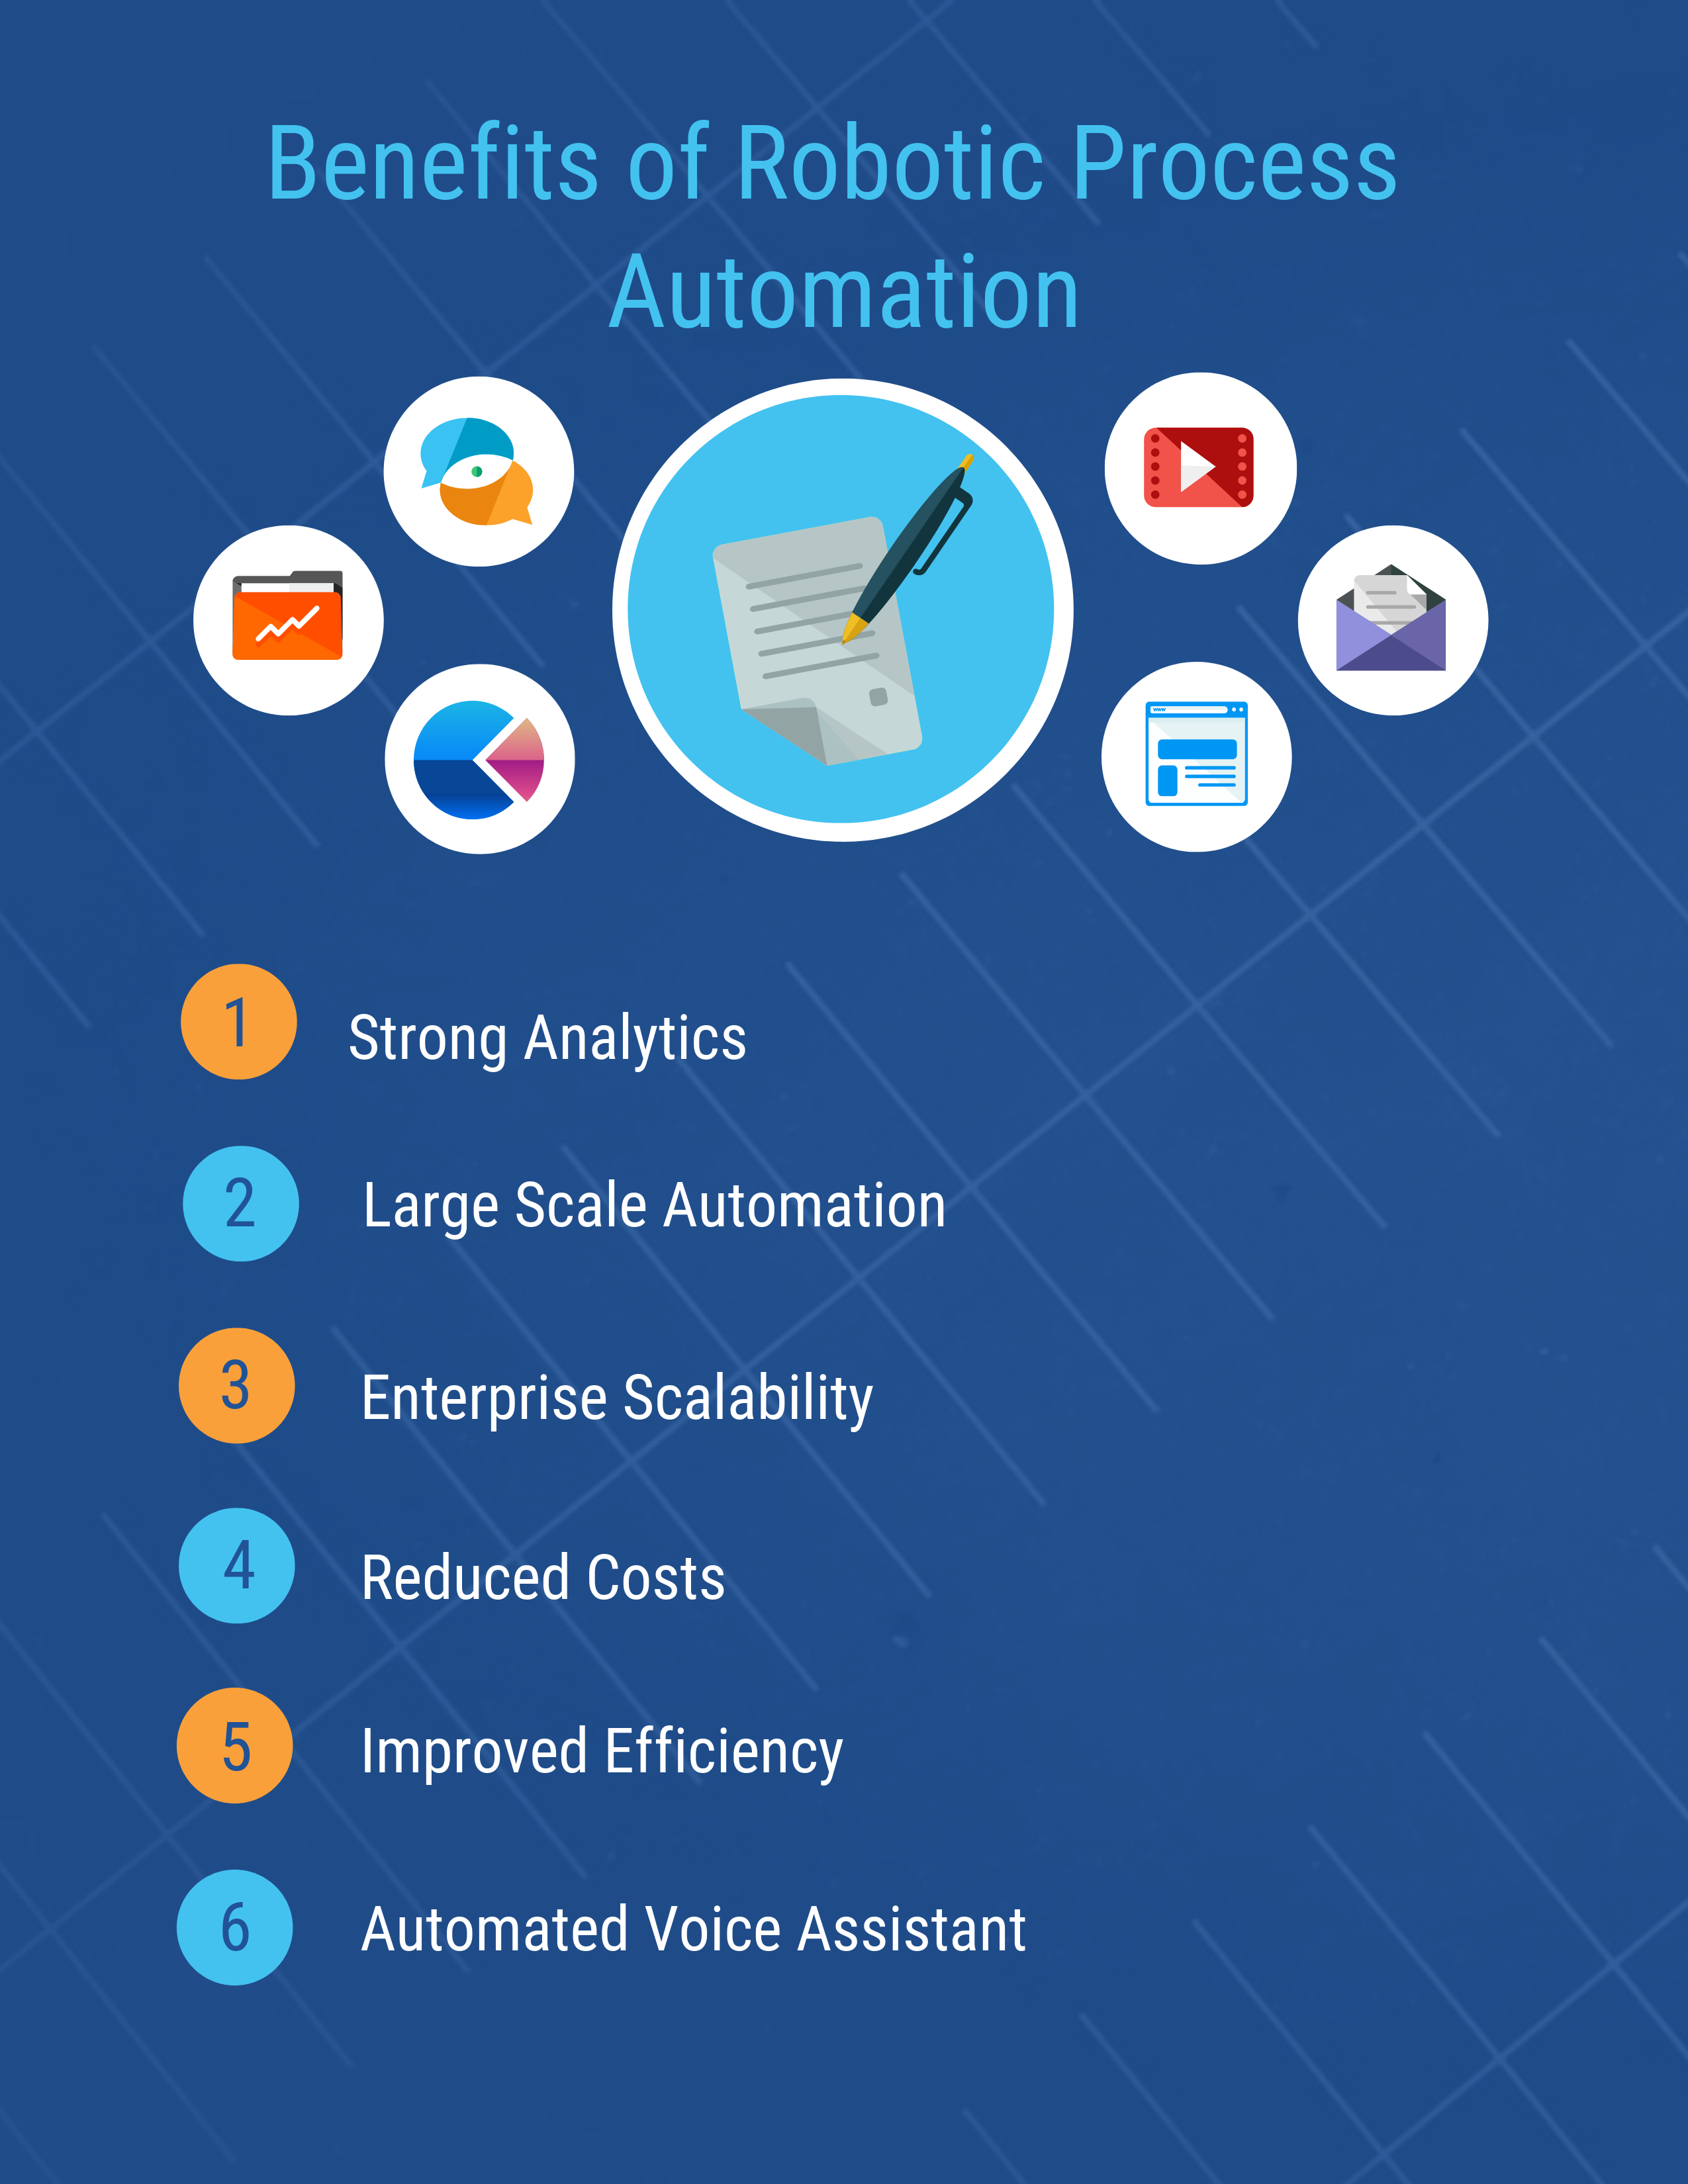 What are the Benefits of Robotic Process Automation